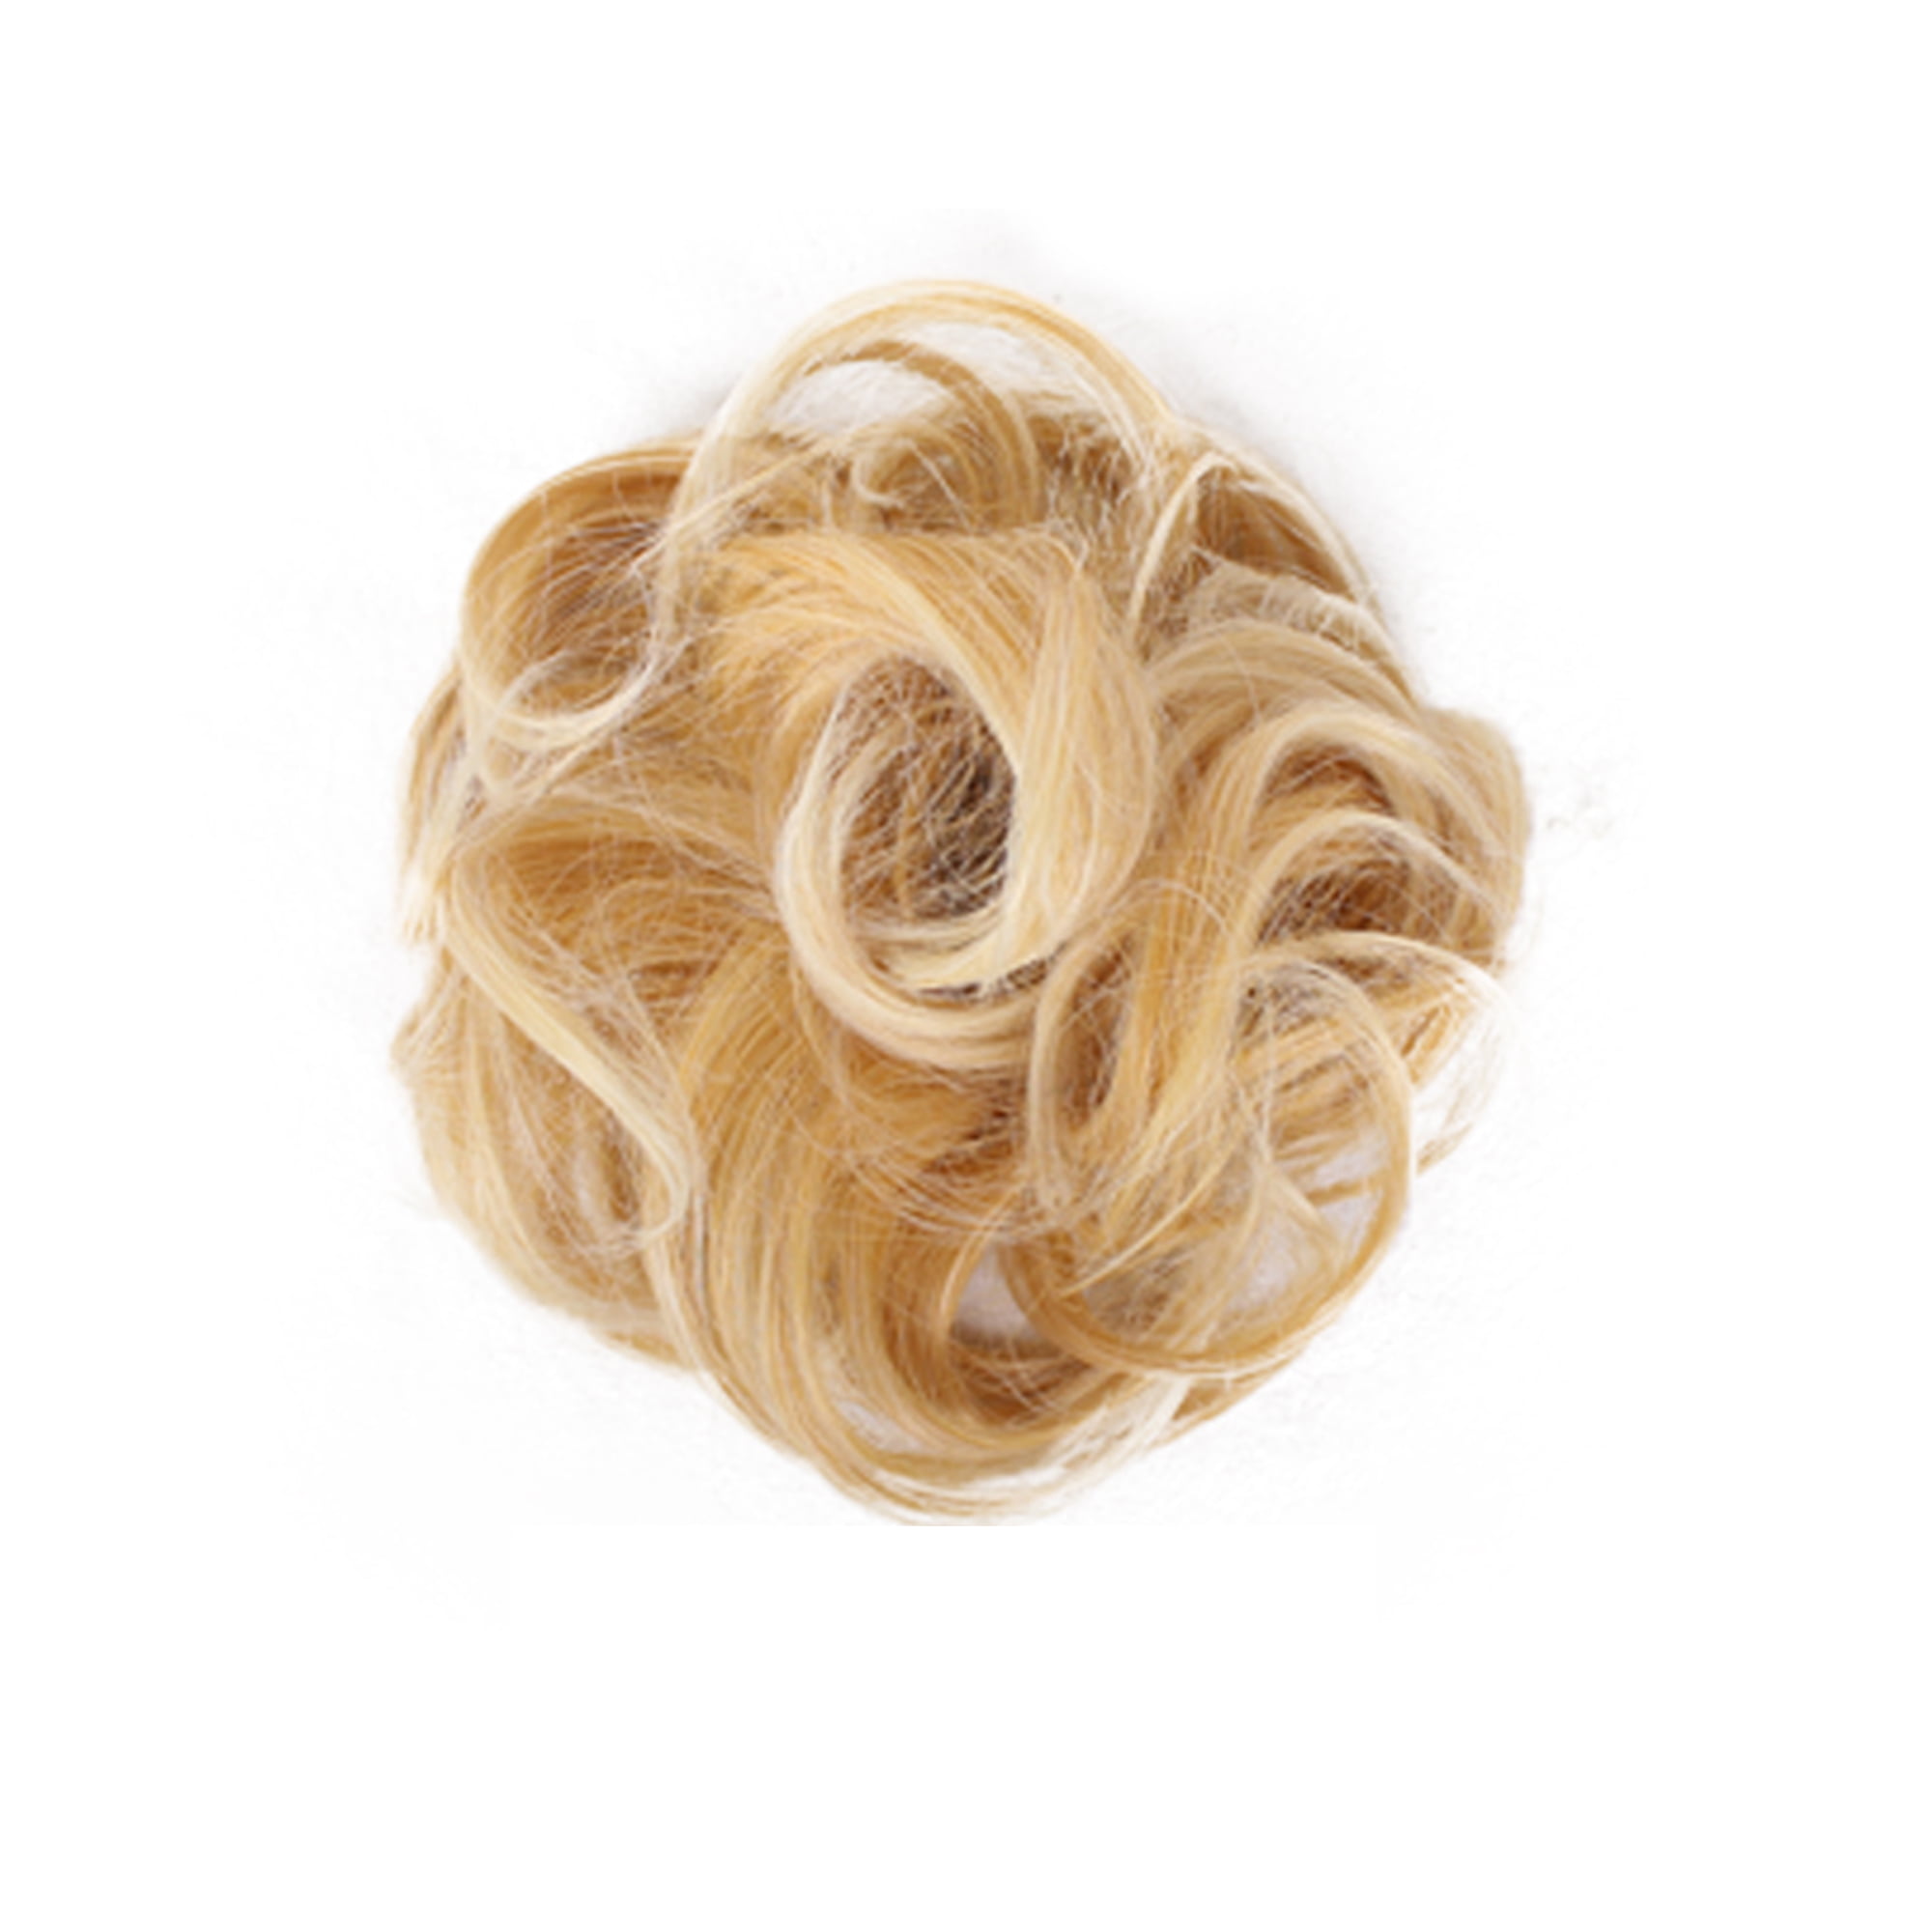 100% Natural Curly Messy Bun Hair Piece Extra Thick Hair Extensions Scrunchie 